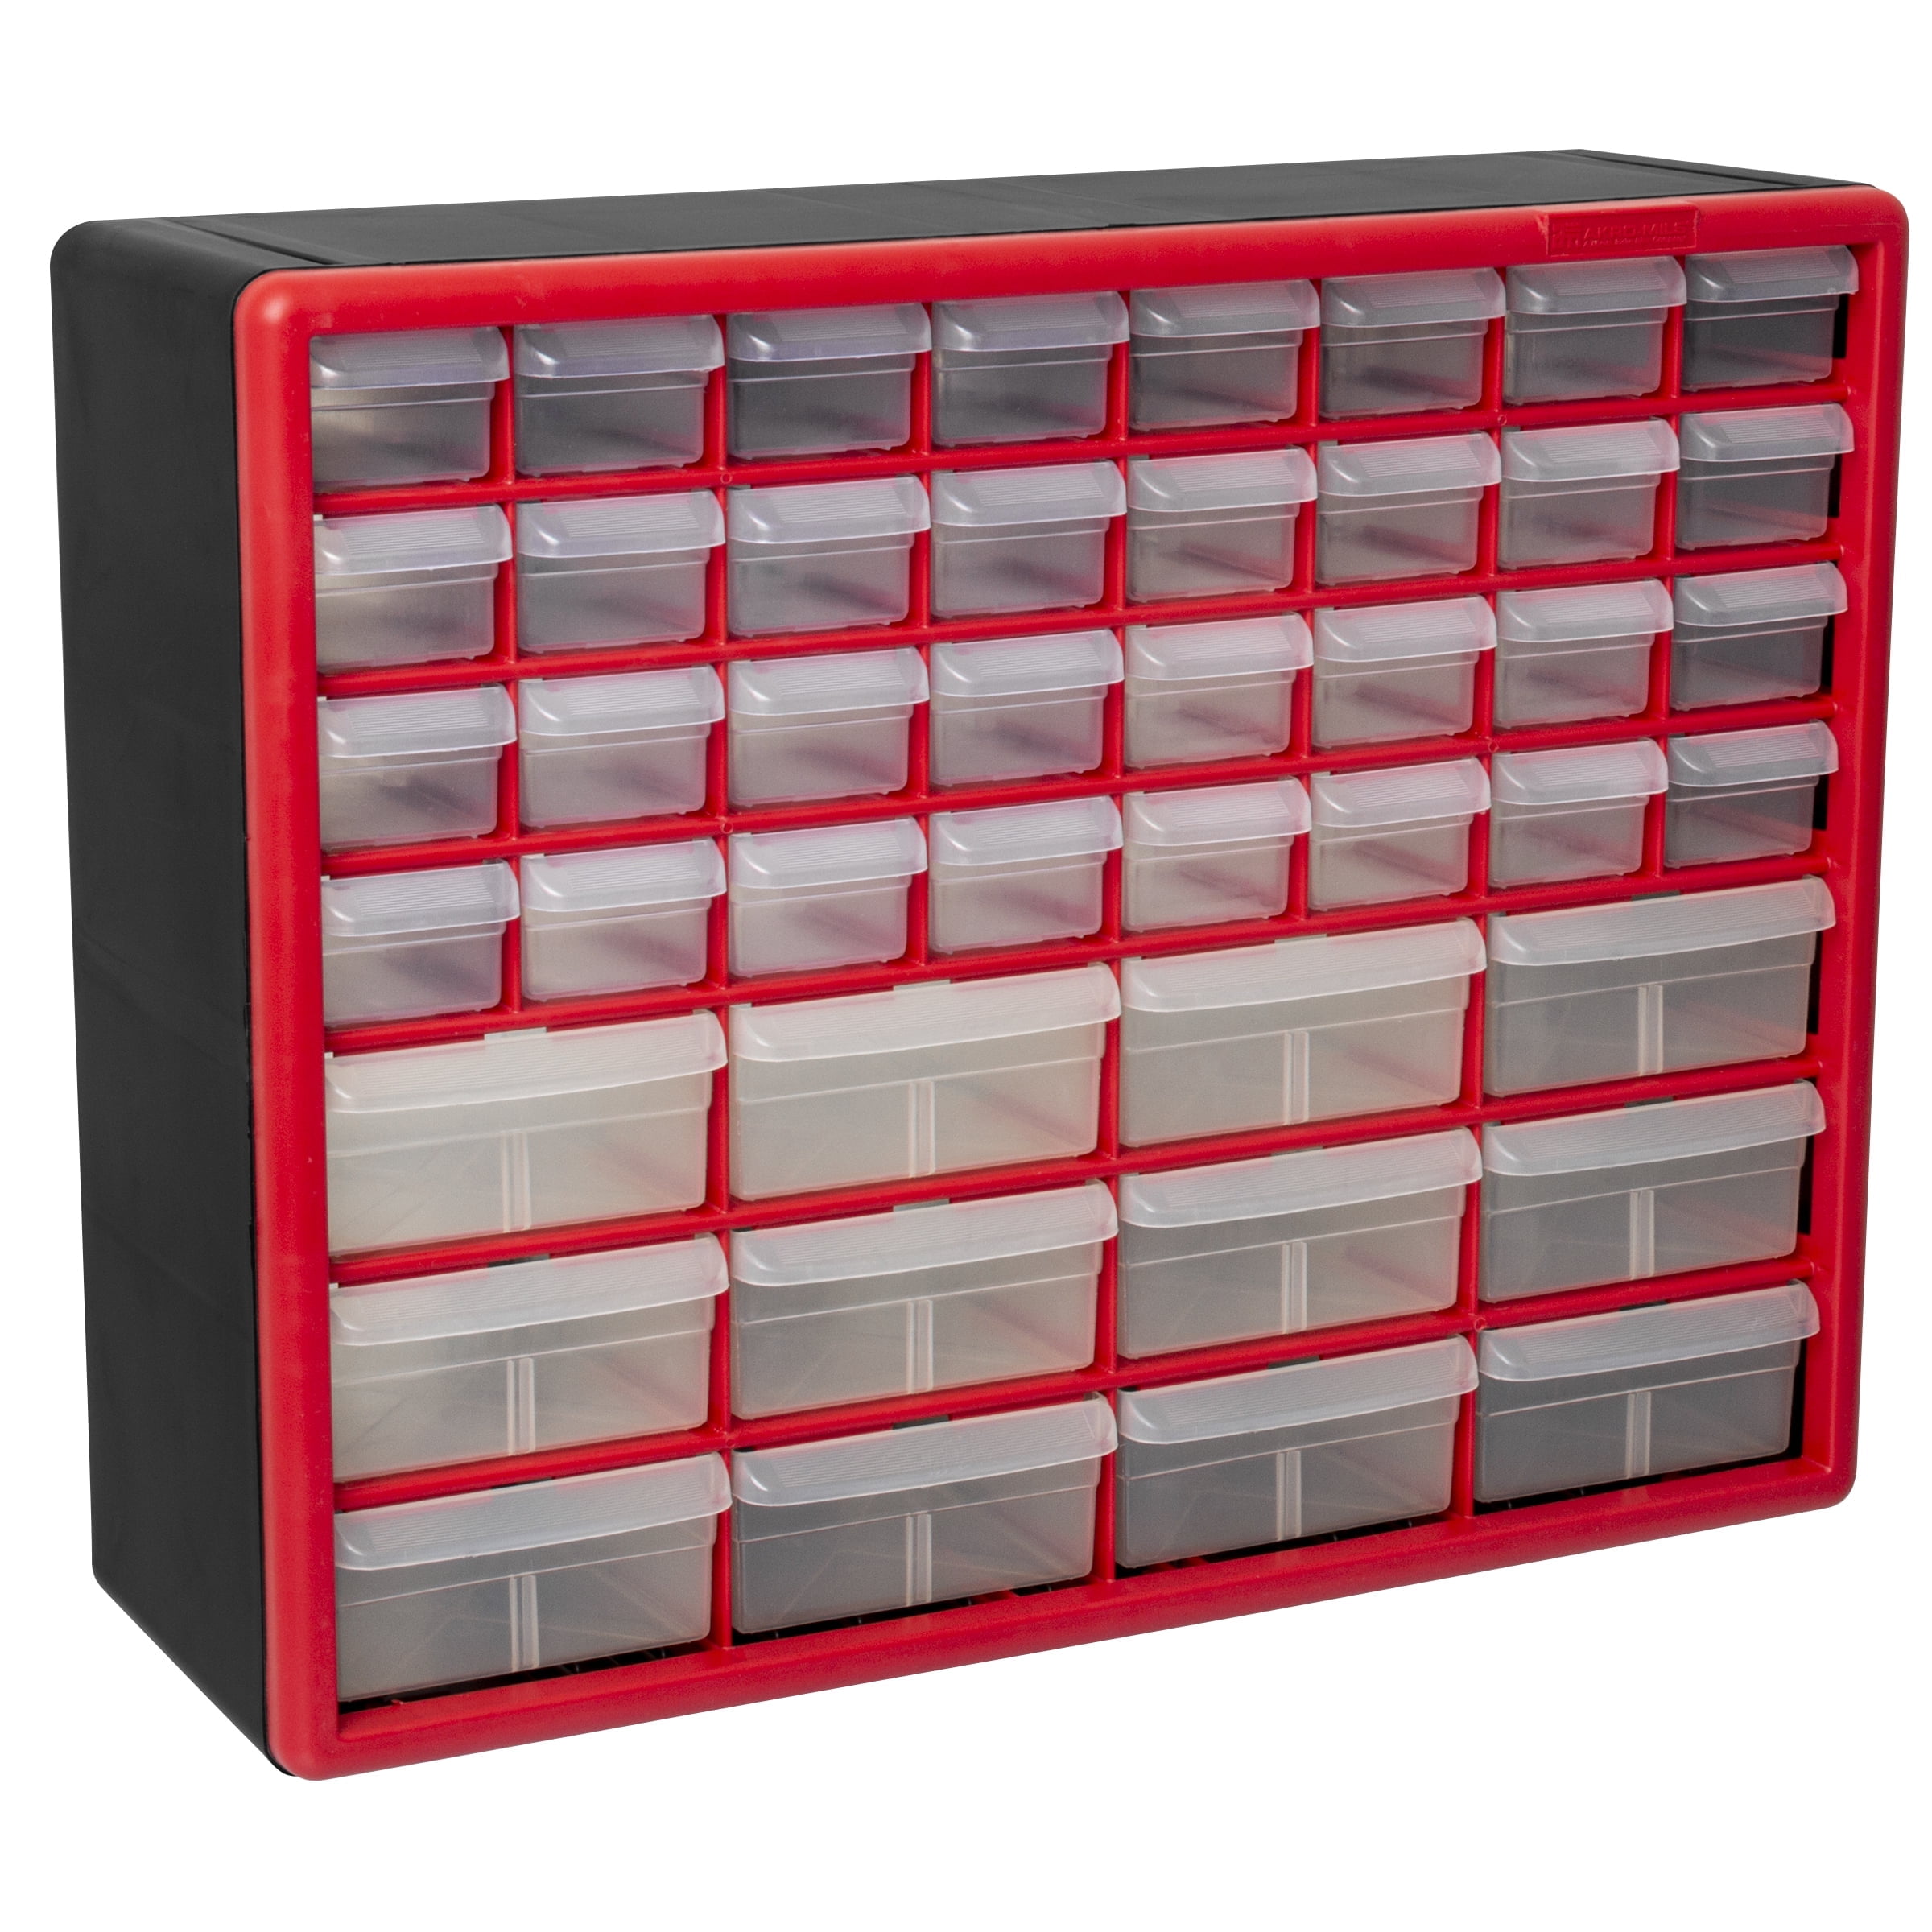 Akro-Mils 44 Drawer Plastic Cabinet Storage Organizer with Drawers for Hardware, Small Parts, Craft Supplies, Red - image 1 of 11